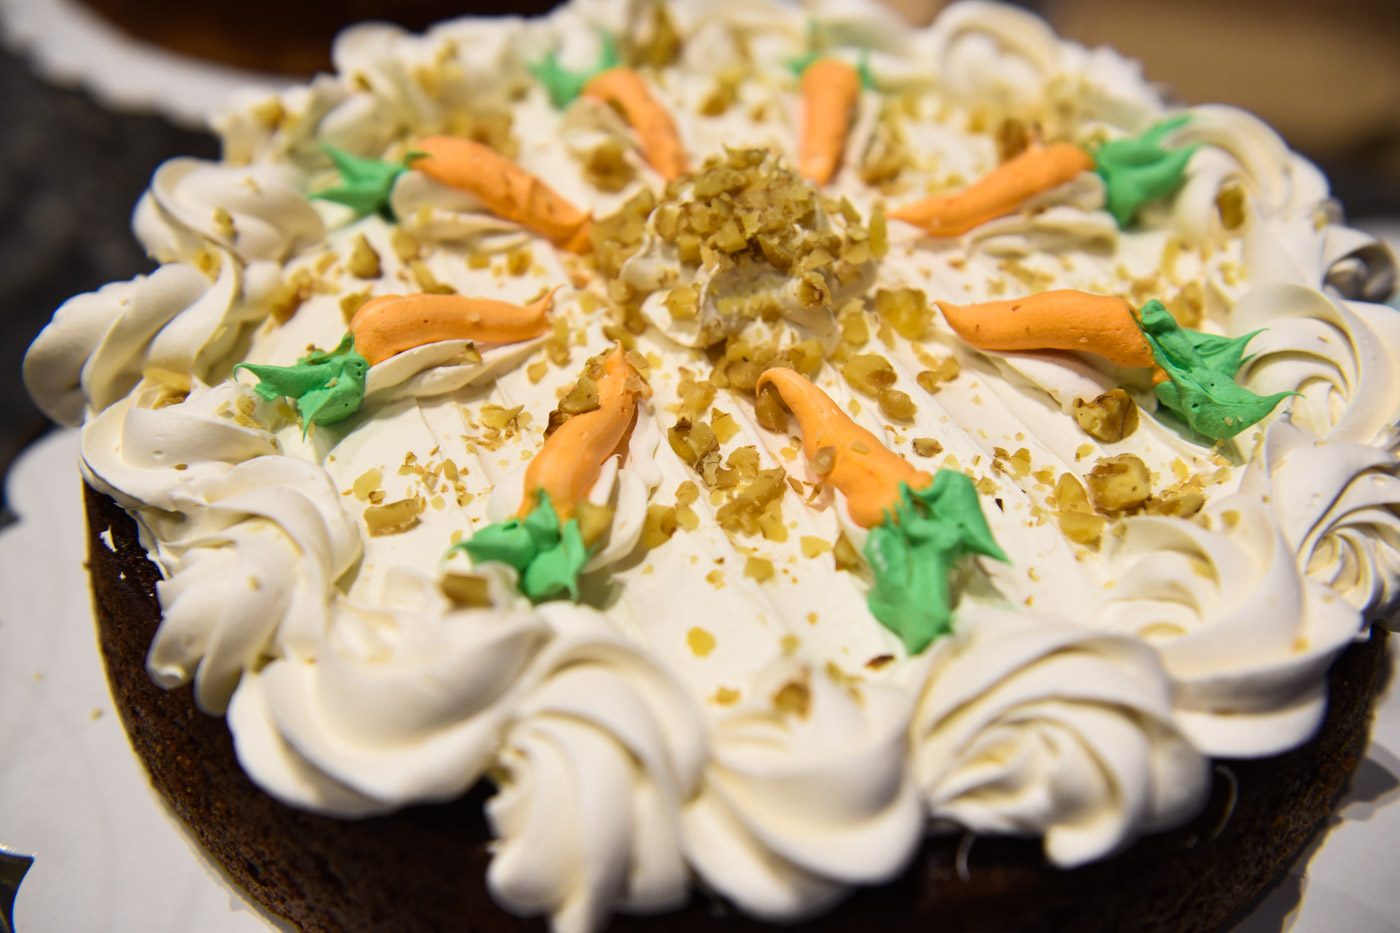 Carrot Cake by Cakes by Lis. Photo by Alecs Ongcal/Rappler 